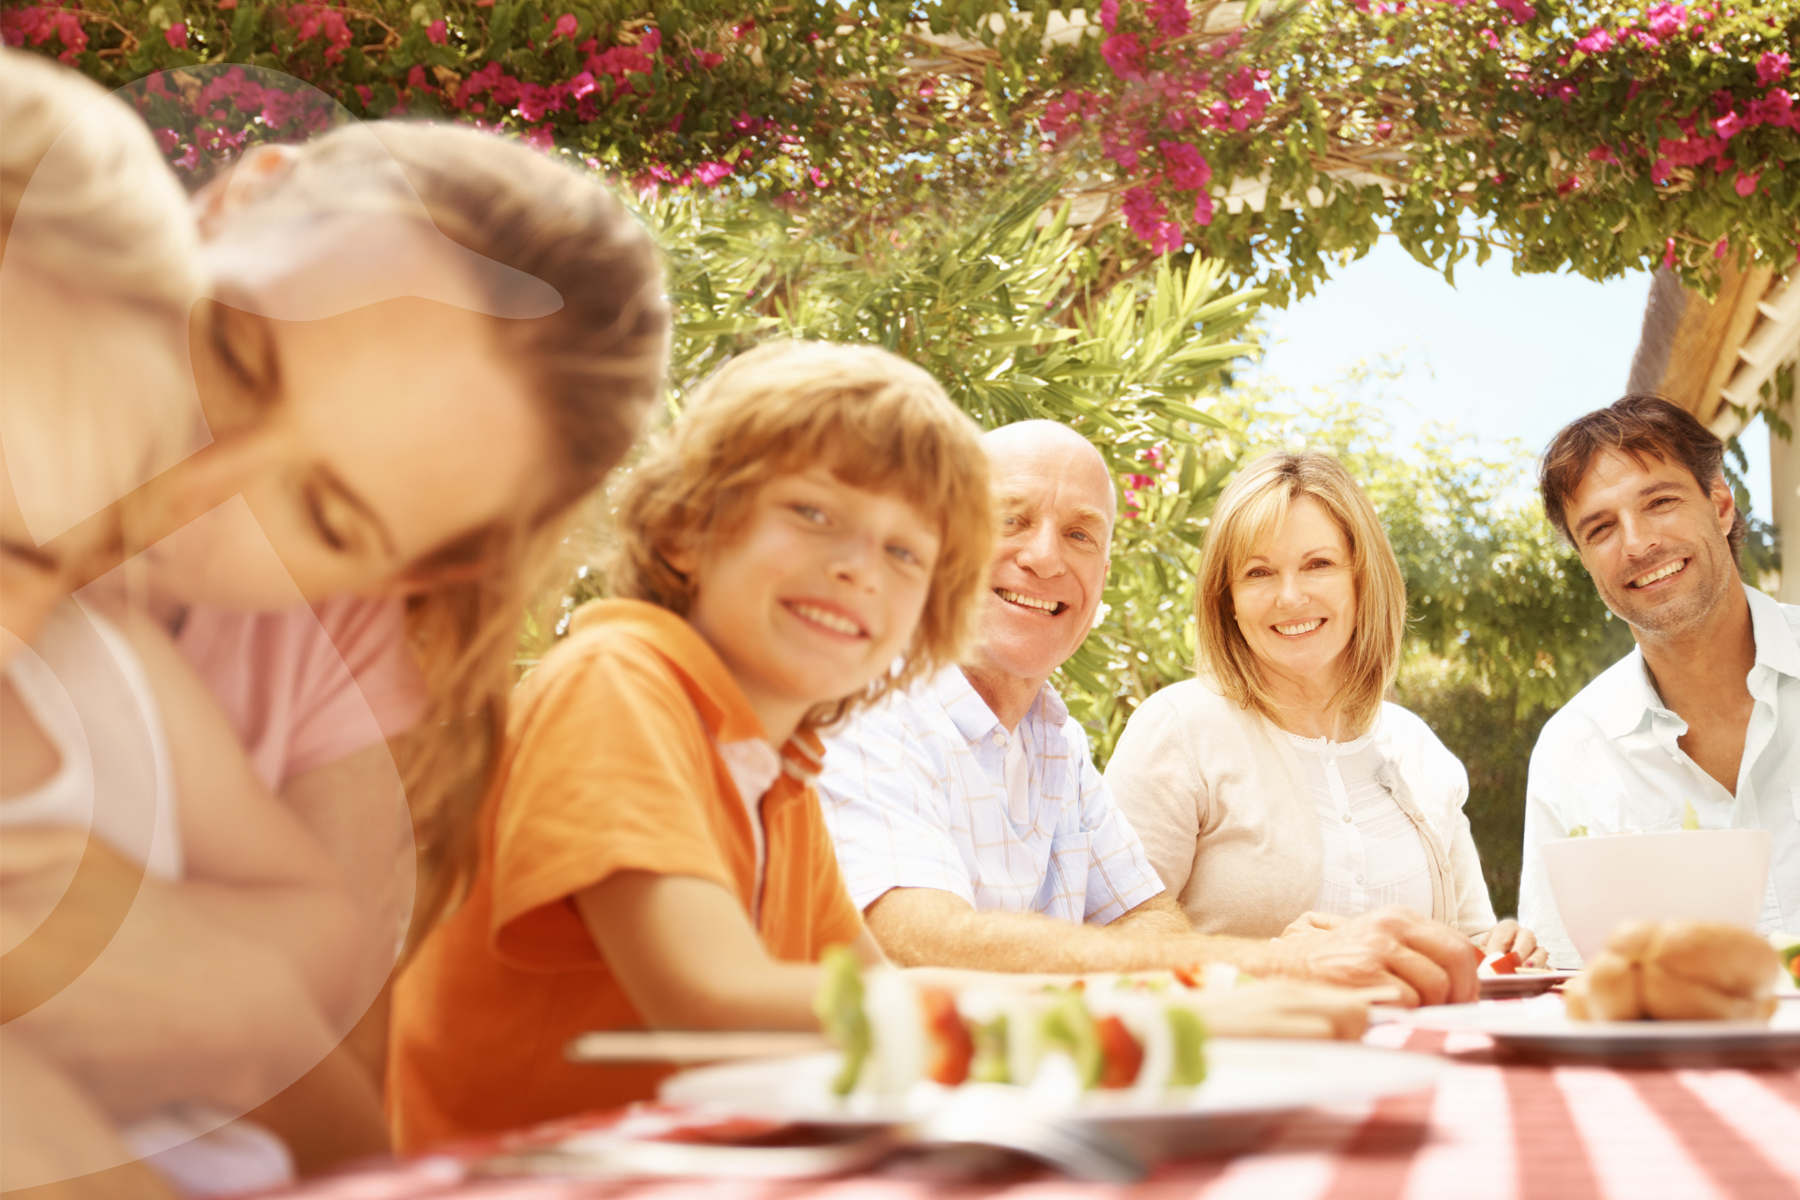 Our tips for an unforgettable family get-together! - Canards du ...